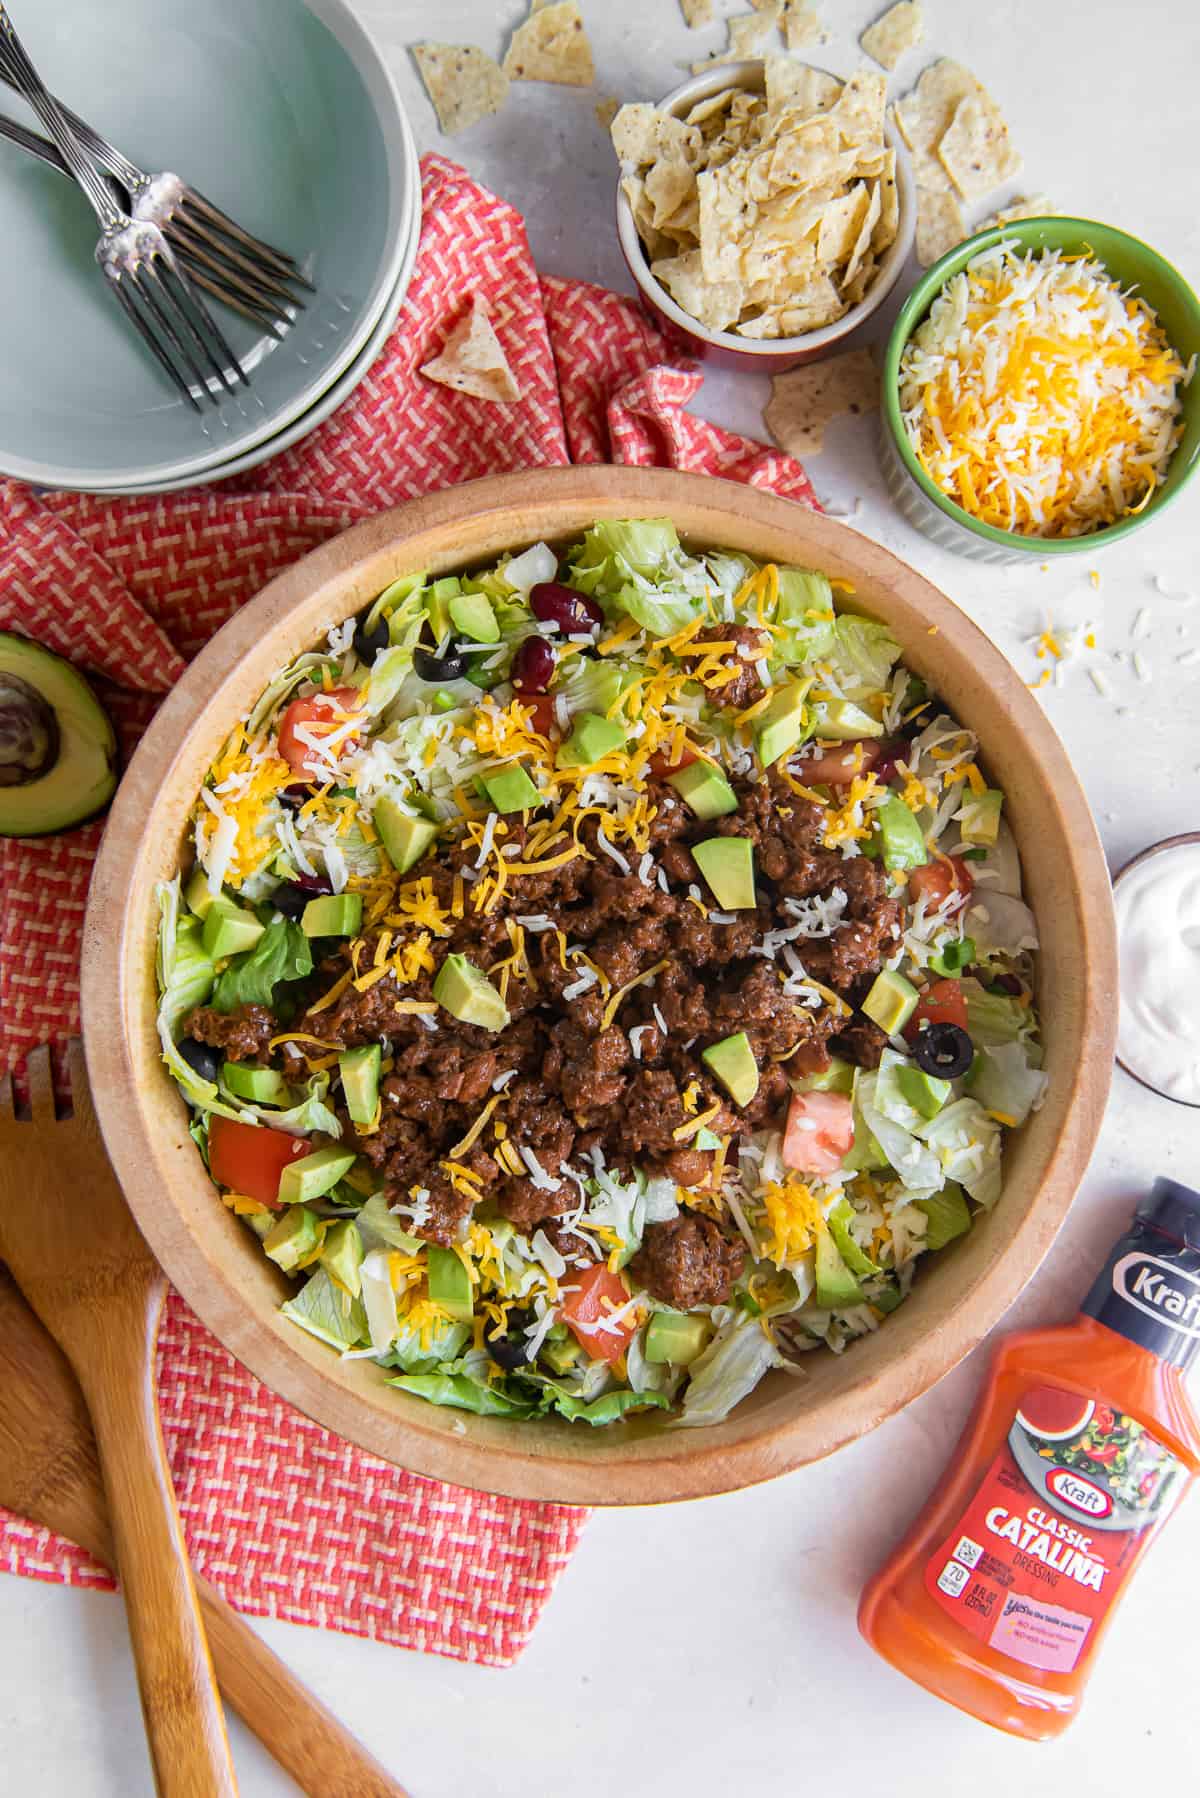 A top down shot of taco salad in a wood salad bowl next to a bottle of Catalina dressing, a small bowl of cheese, and crushed tortilla chips.